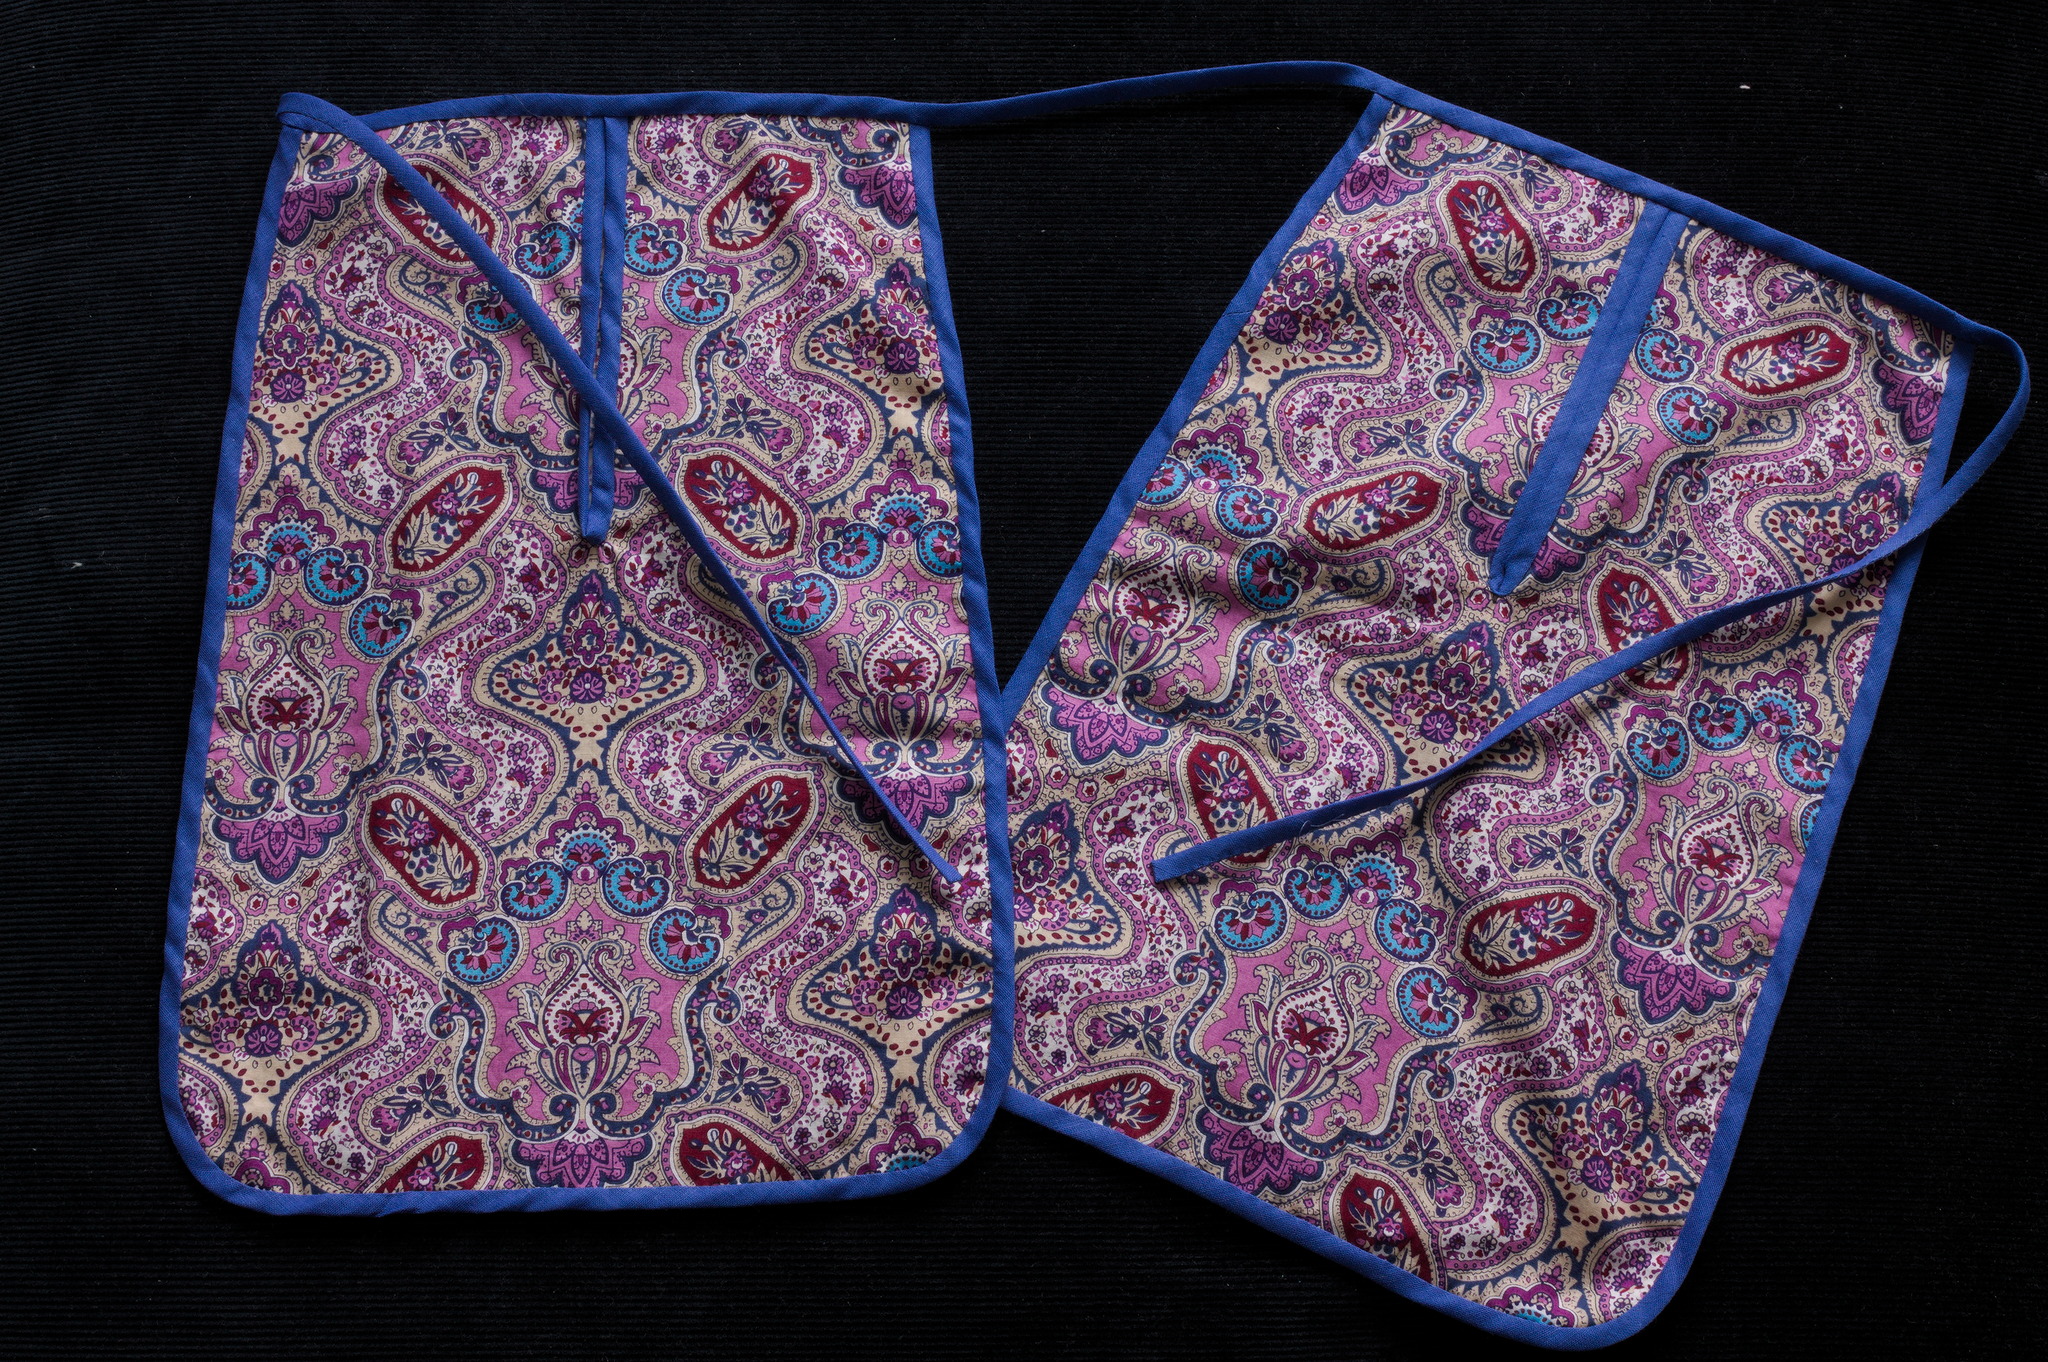 ../../../_images/pair_of_pockets_patterned_cotton.jpg